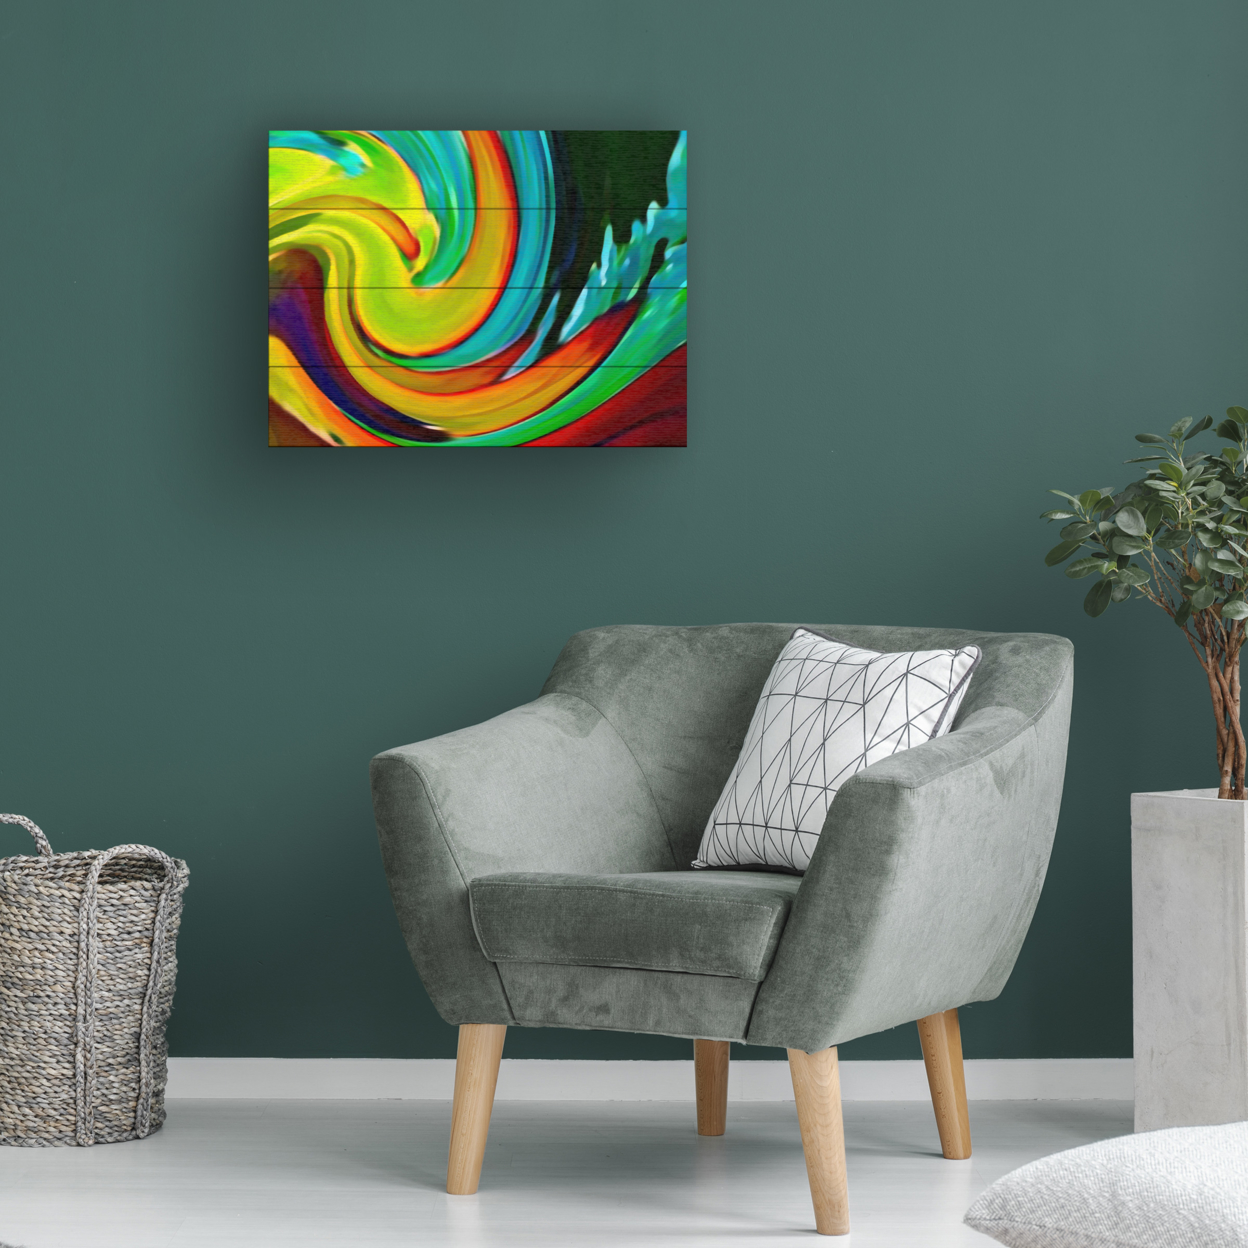 Wall Art 12 X 16 Inches Titled Crashing Wave Ready To Hang Printed On Wooden Planks